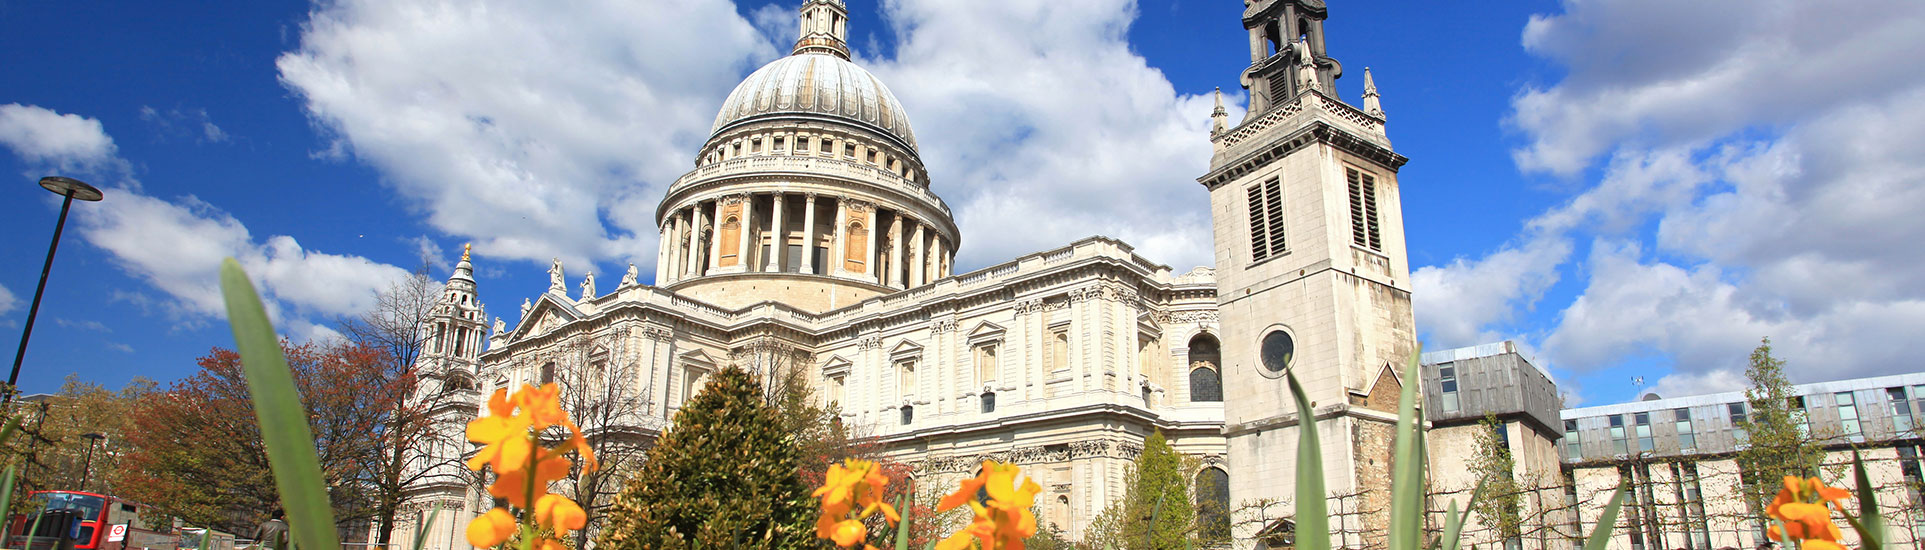 tourhub | Just Go Holidays | Spectacular St Paul’s Cathedral & London 